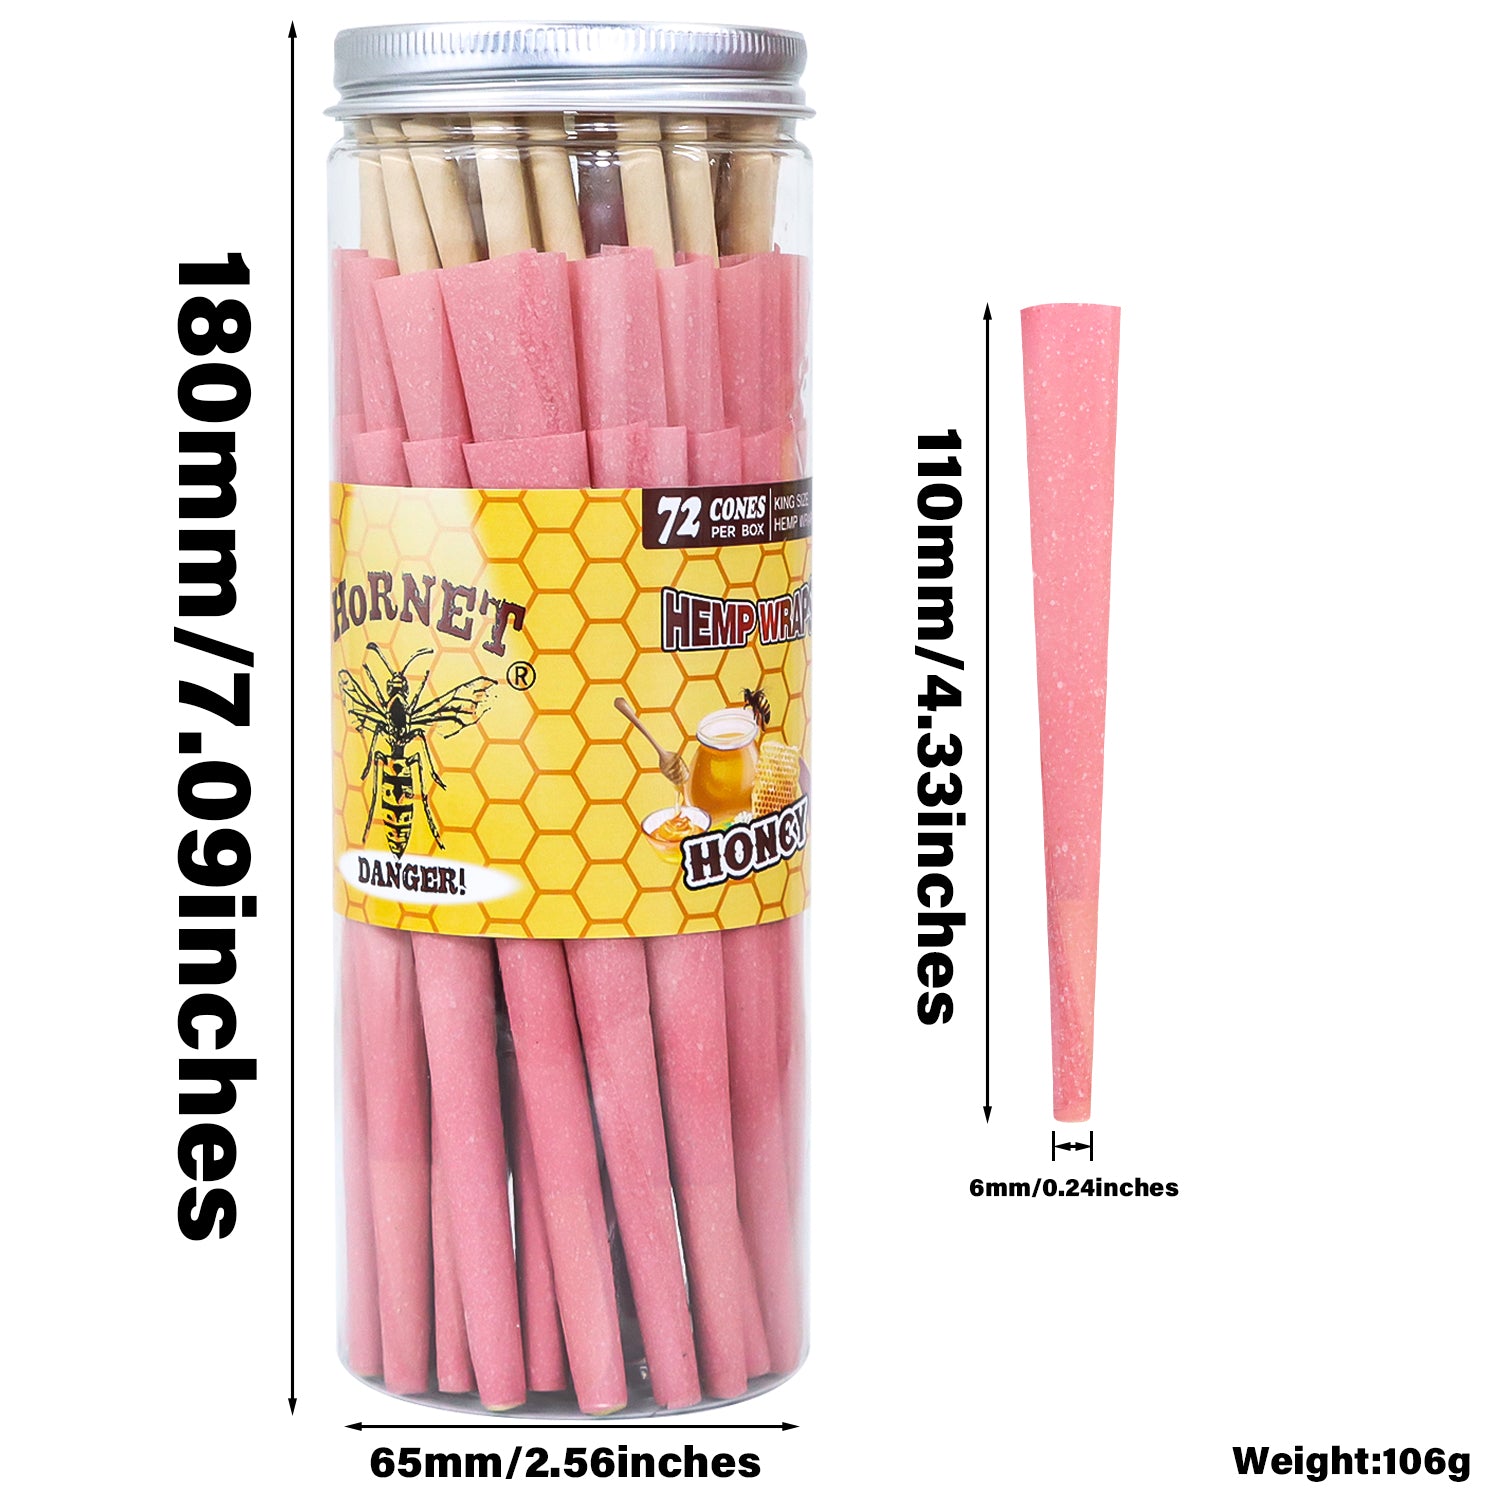 HORNET Honey Flavored Pink Pre Rolled Cones, King Size Pre Rolled Rolling Paper with tips, Slow Burning Rolling Cones & load, 72 PCS / Jar